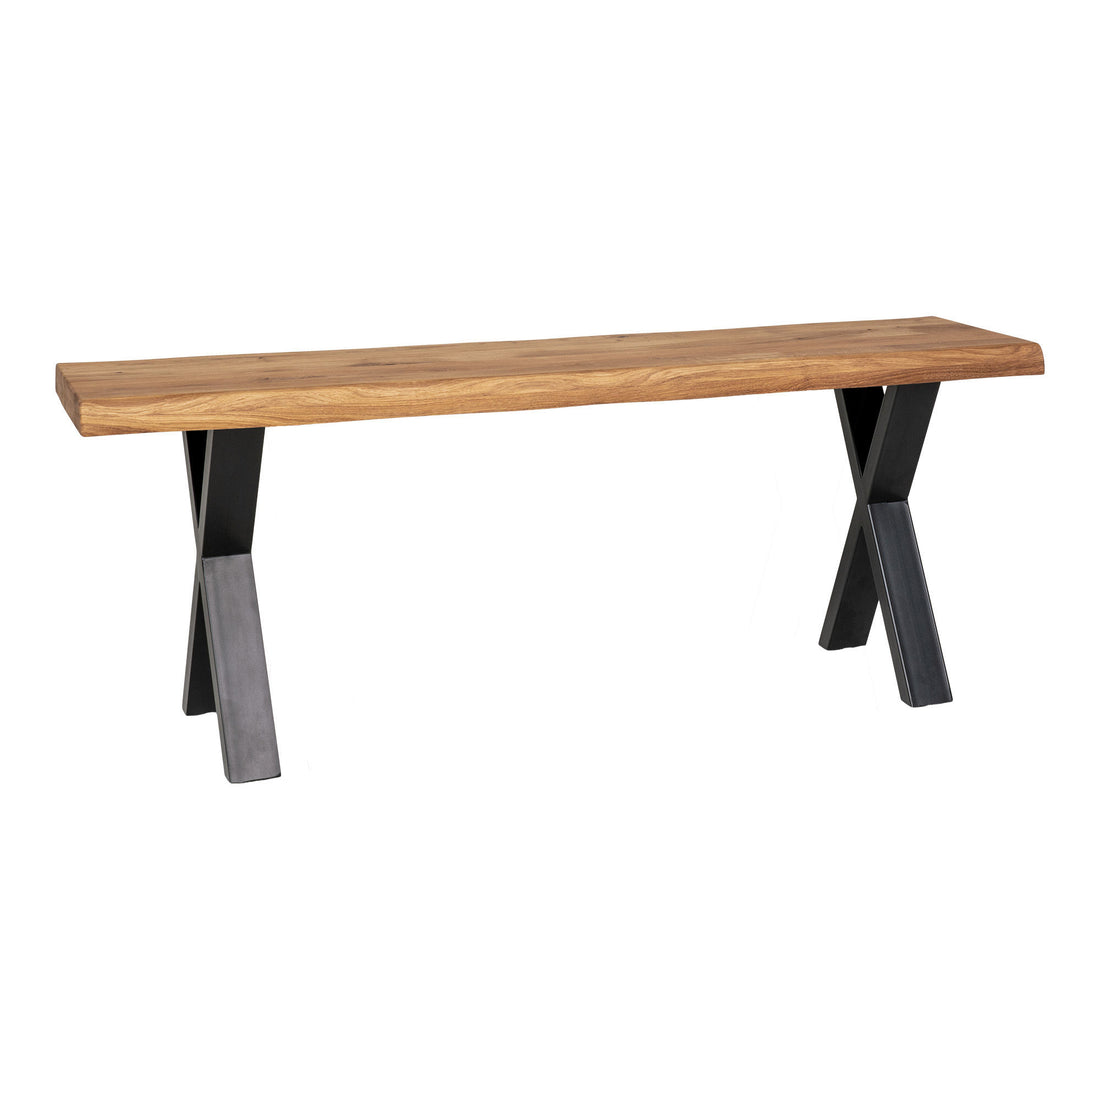 Toulon bench - bench in oiled oak with wavy edge 120x32 cm - 1 - pcs